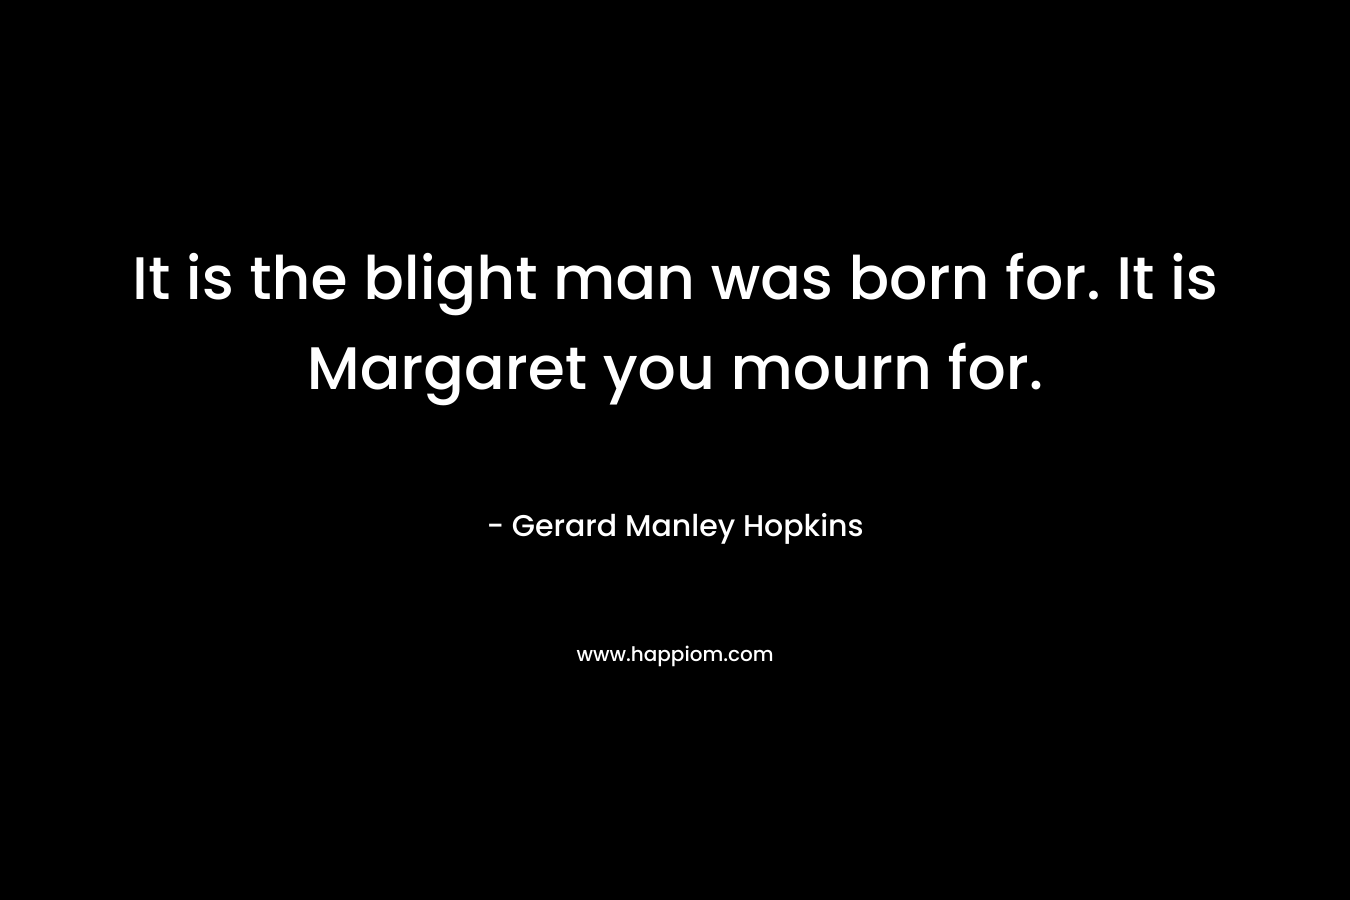 It is the blight man was born for. It is Margaret you mourn for. – Gerard Manley Hopkins